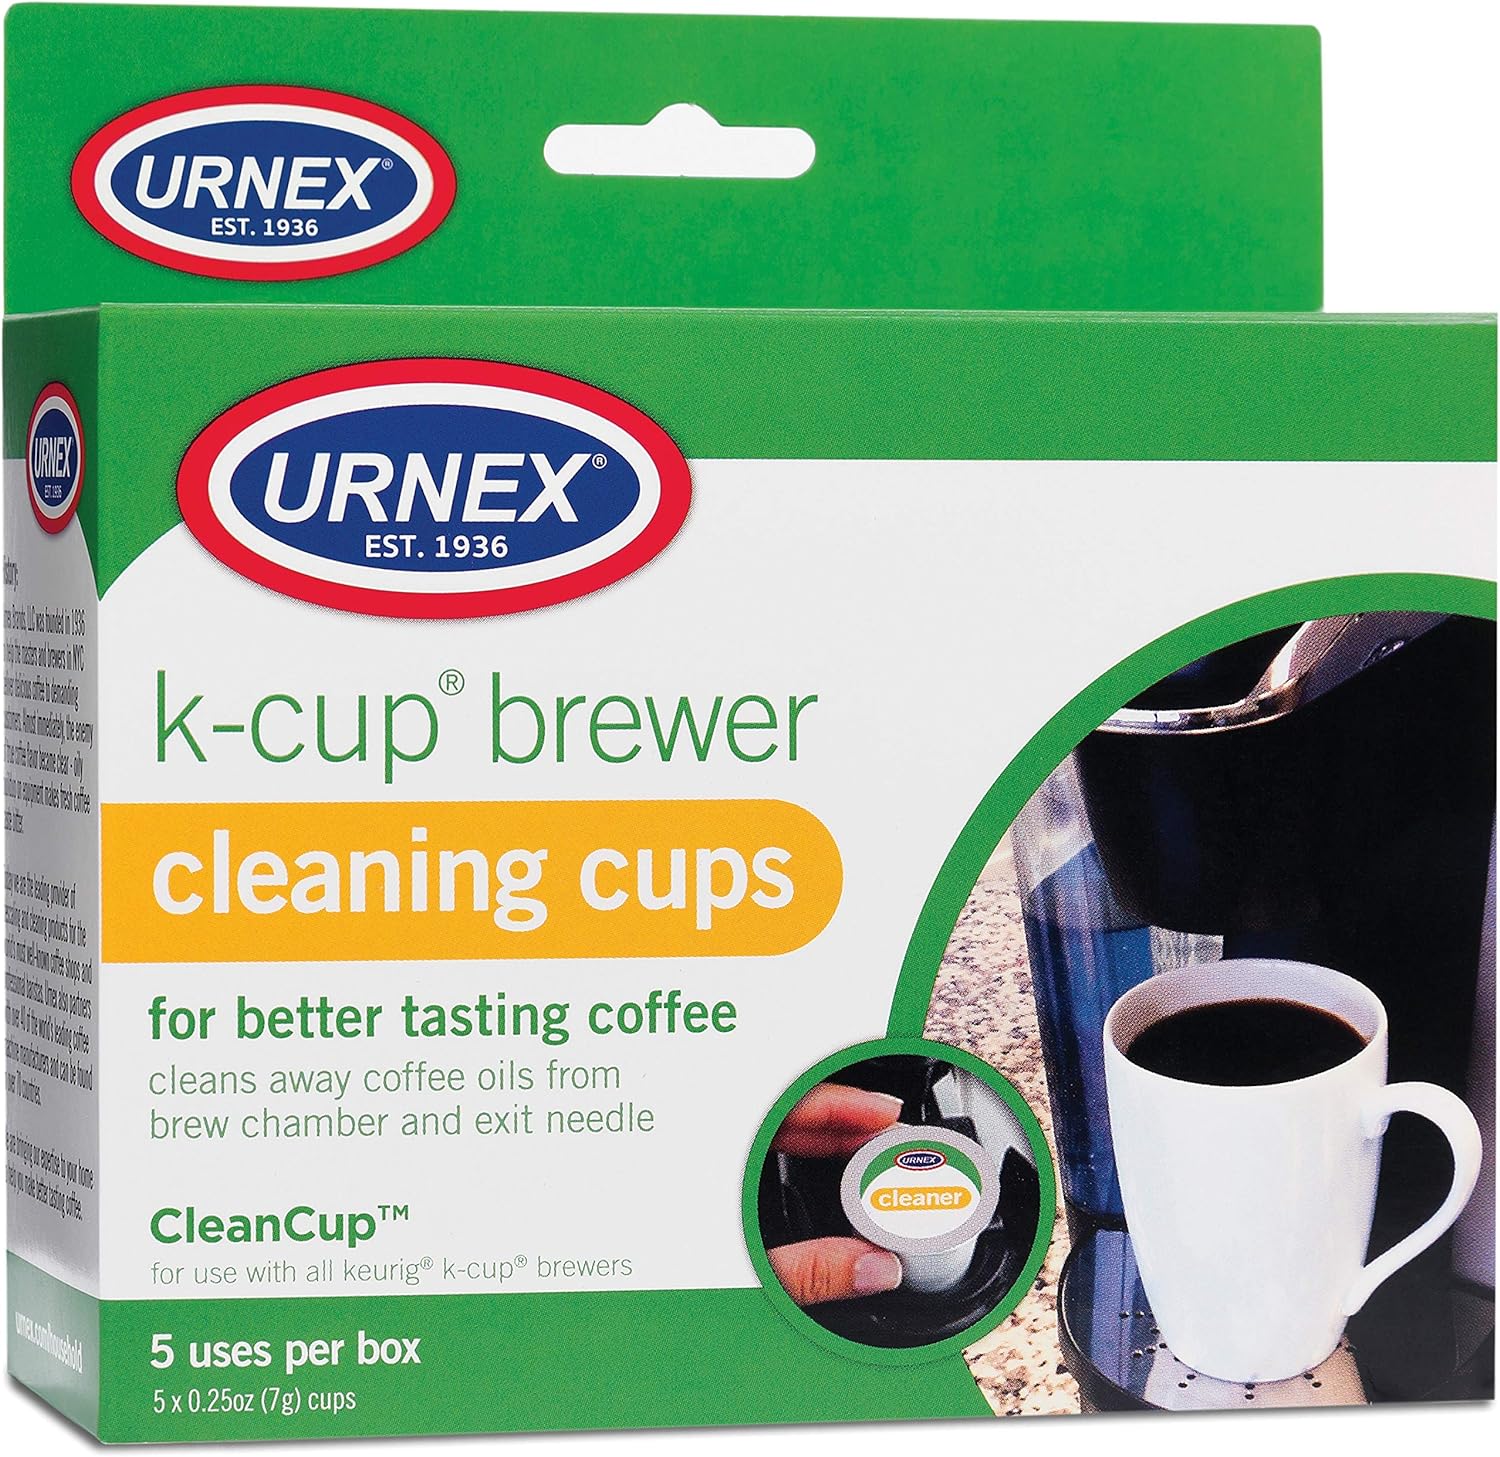 This product does exactly what it' supposed to do: Clean your Keurig machine' needles.You pop one in and run a large cup cycle. Lots of soapy liquid emerges. Open and close your machine and run another cycle through.Then rinse by running a couple/few cycles with no pod, just water. That' it!Afterwards, your Keurig needles should be clean and water flow like new.Personally, I like the Urnex Descaling Liquid, too. While these clean the needles, specifically, the Descaling Liquid cleans the rese